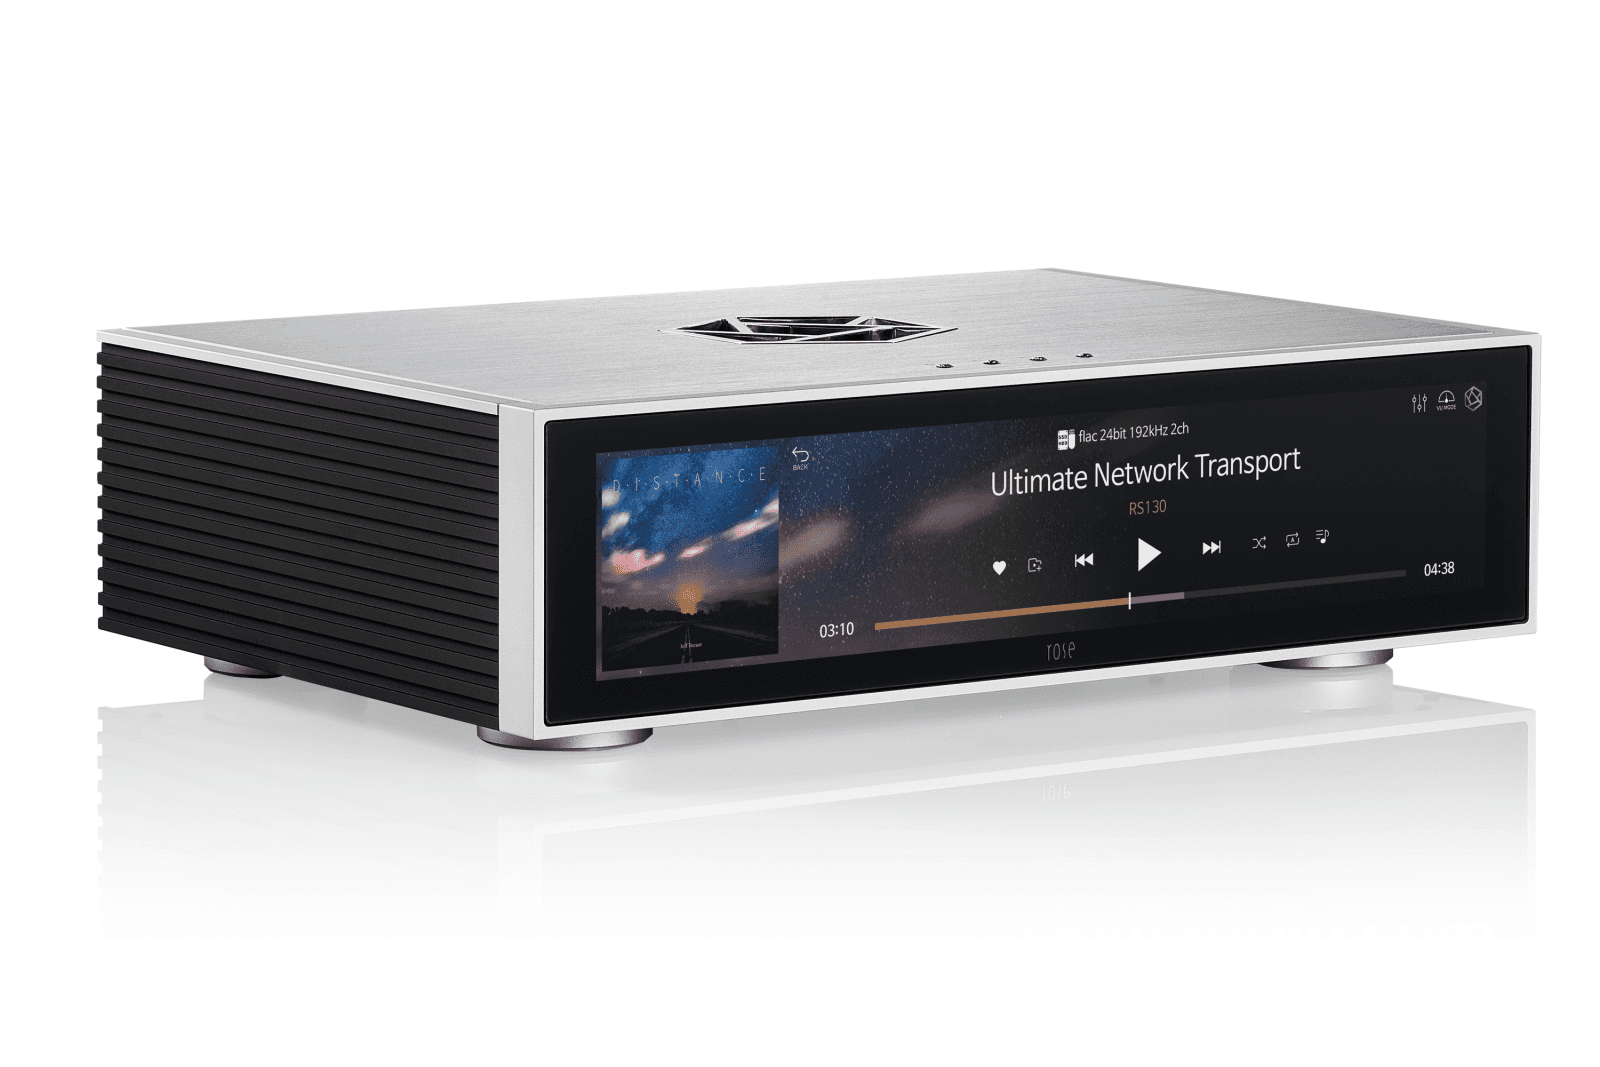 How to build the hi-fi system of your dreams